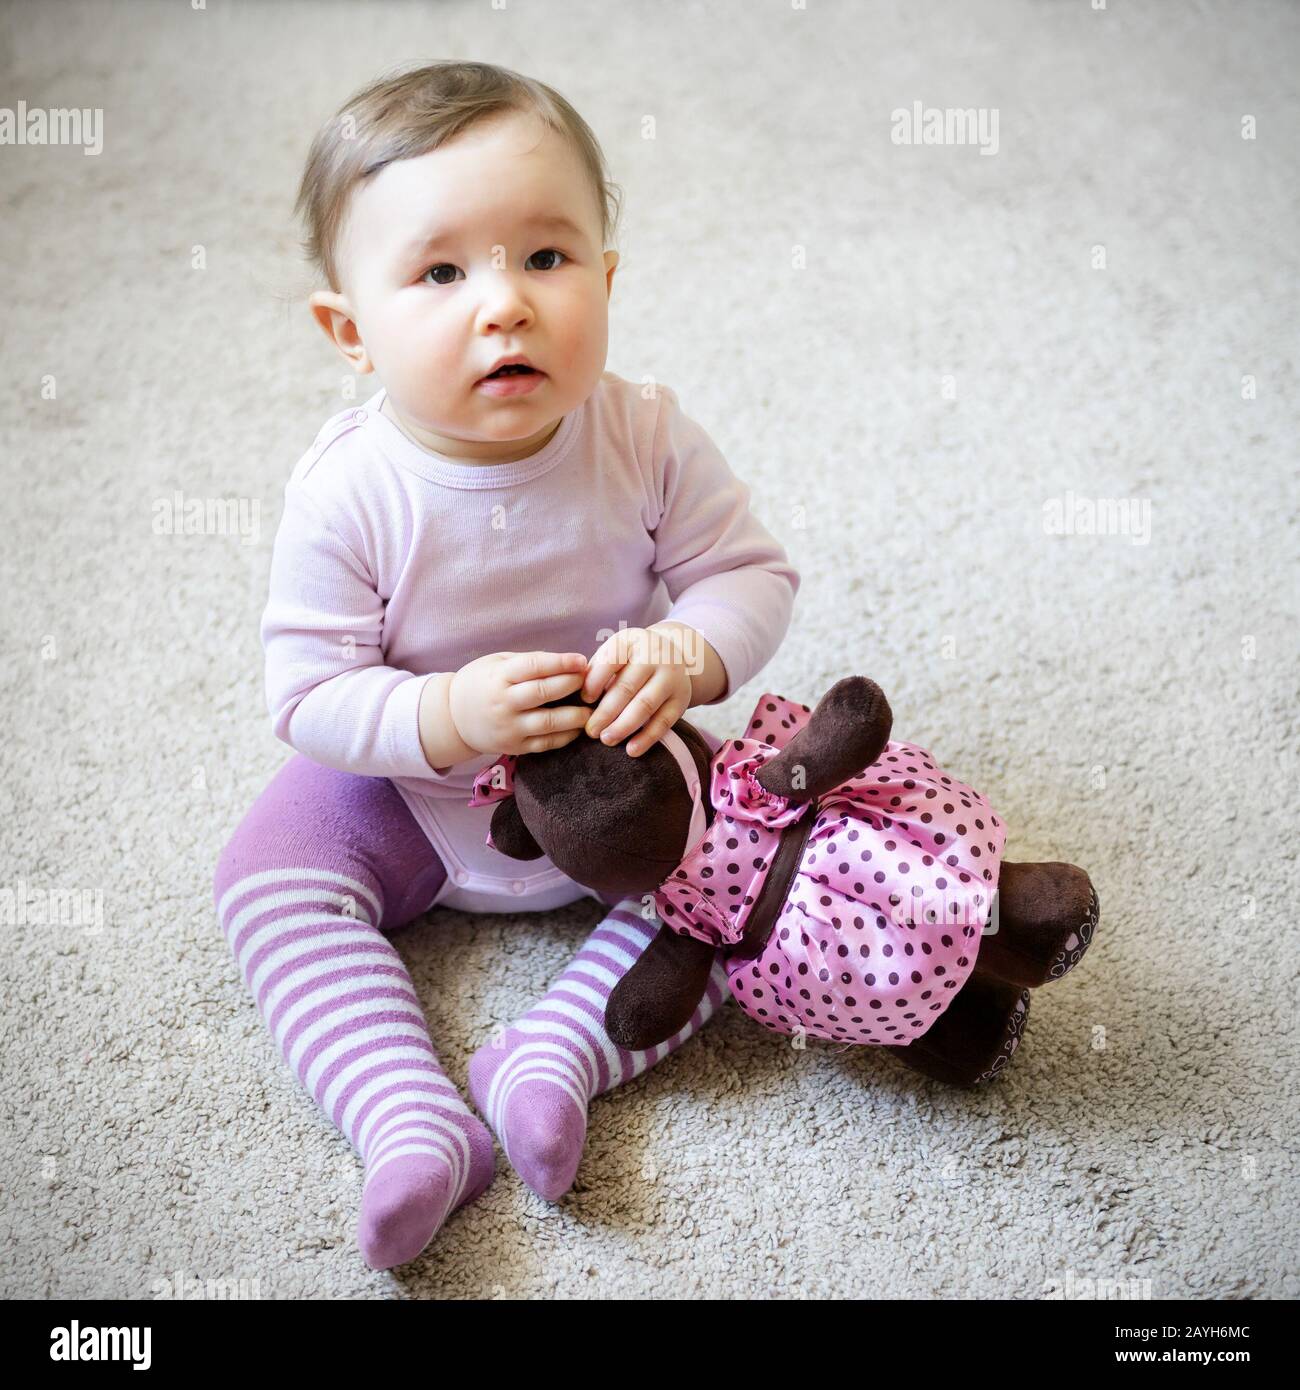 Thoughtful and serious nice baby girl sitting on the floor with toy bear at home Stock Photo